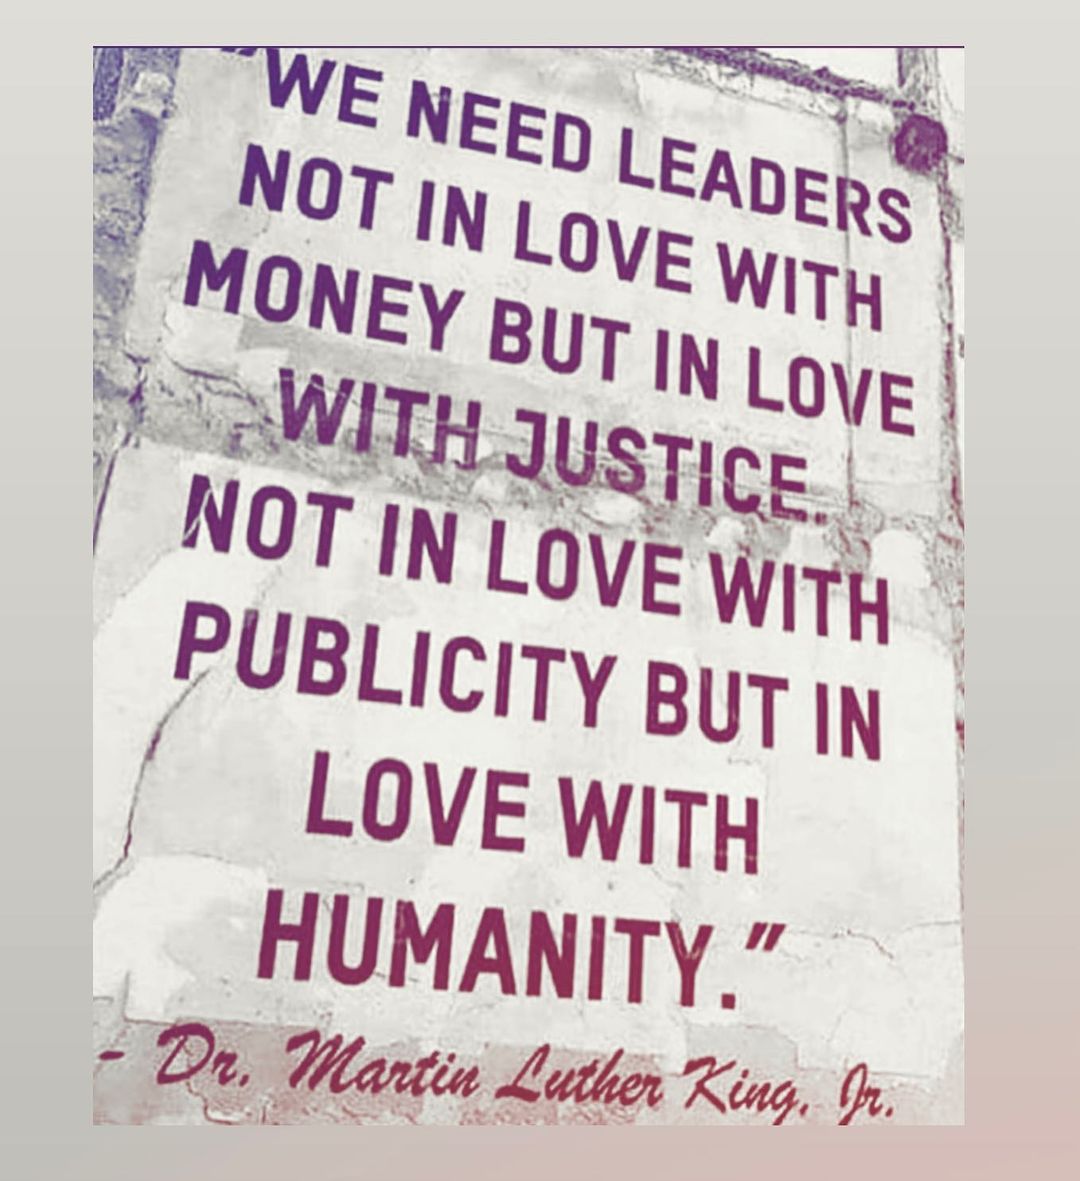 We need #leaders who are in #love with #justice and #humanity. Period. #RegenerativeLeadership